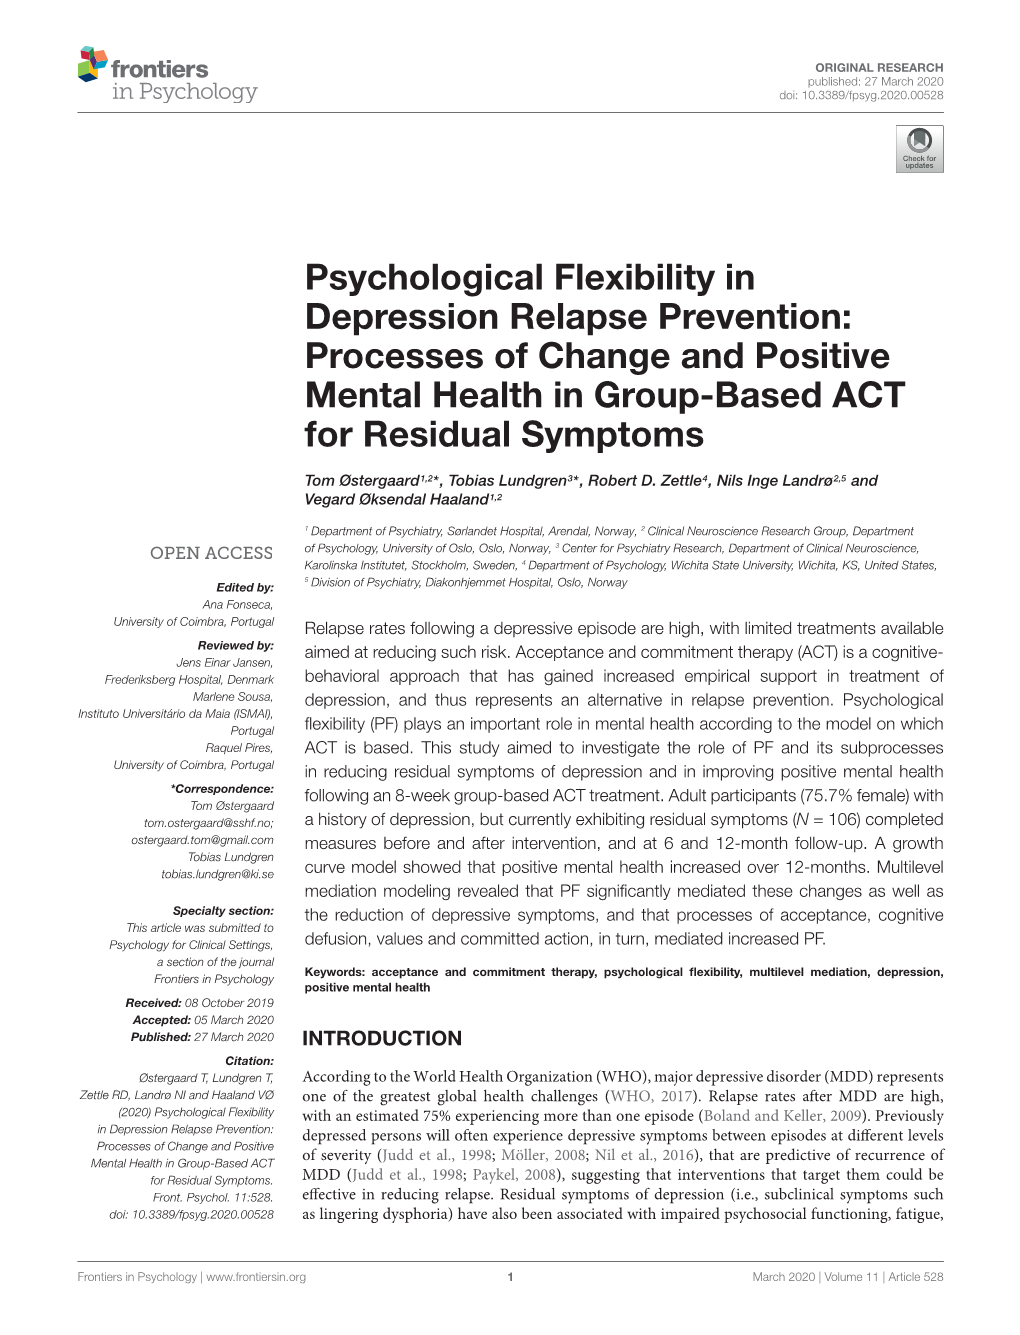 Processes of Change and Positive Mental Health in Group-Based ACT for Residual Symptoms